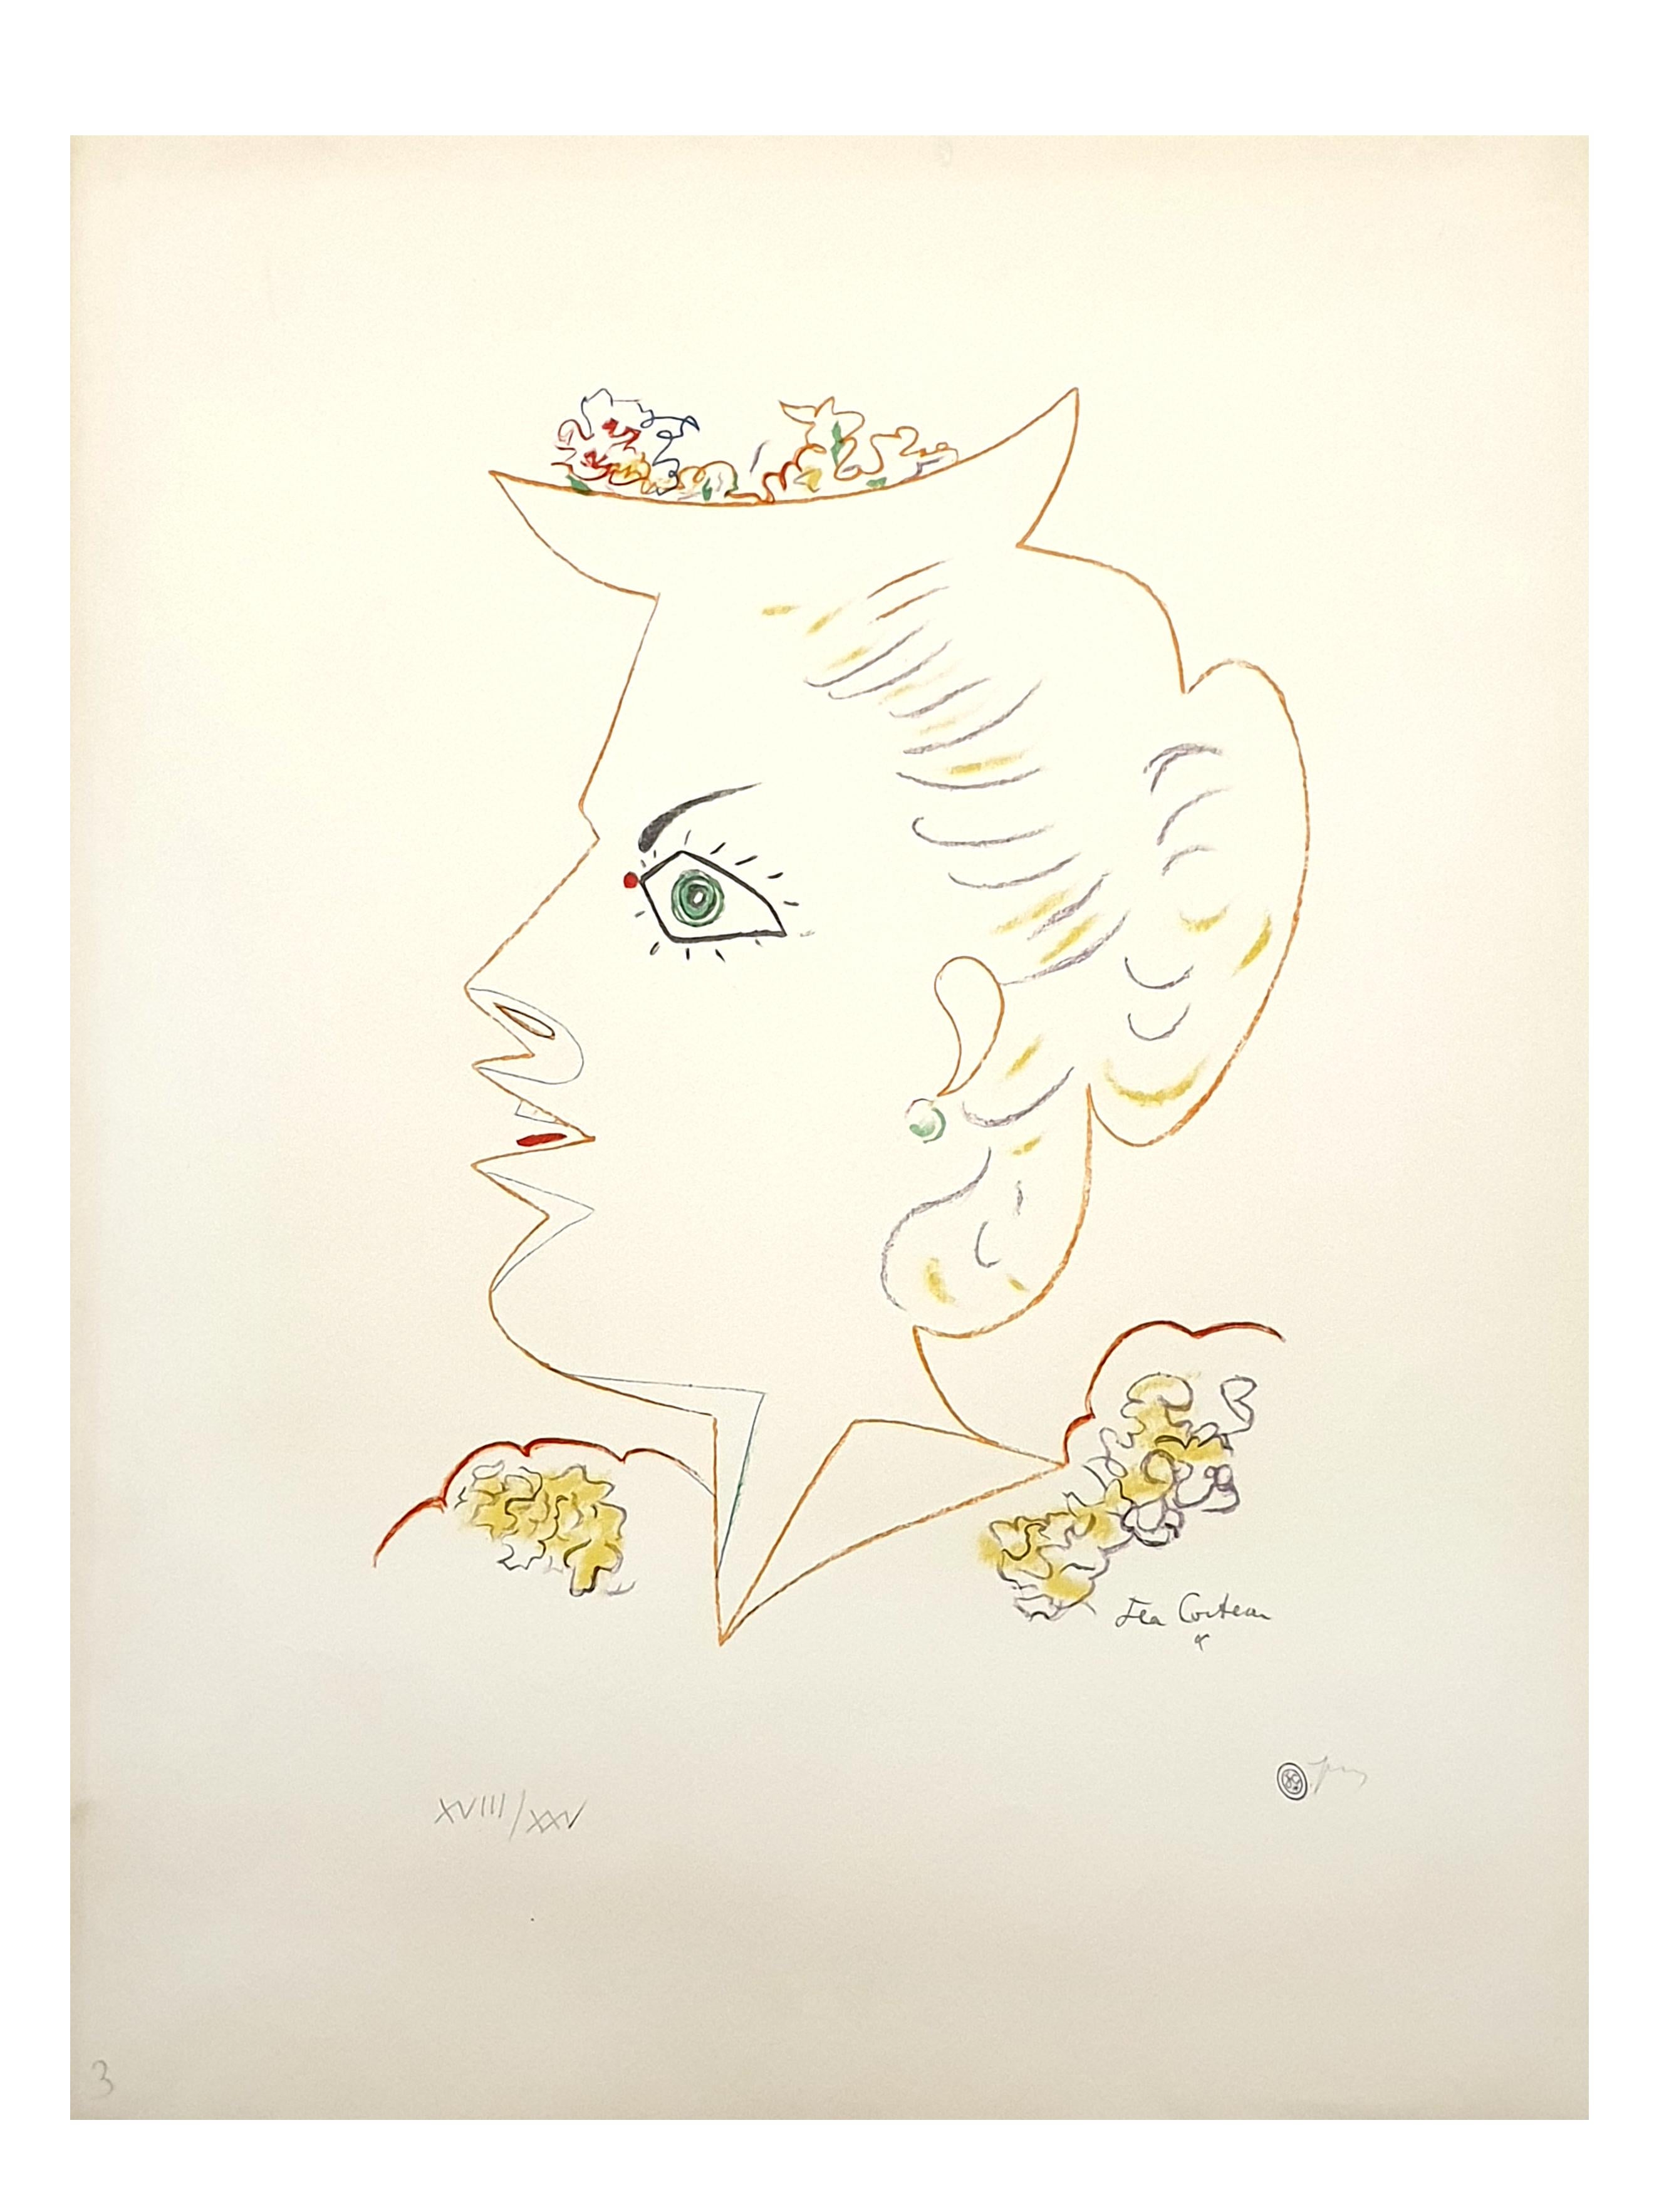 Jean Cocteau - Lady with Flowered Hat - Original Lithograph
1956
Stampsigned lower right
Signed in the plate
Numbered in pencil
Edition : /XXV
Dimensions: 65 x 50 cm
Provenance : Succession Dermit, Cocteau's heir

Jean Cocteau

Writer, artist and